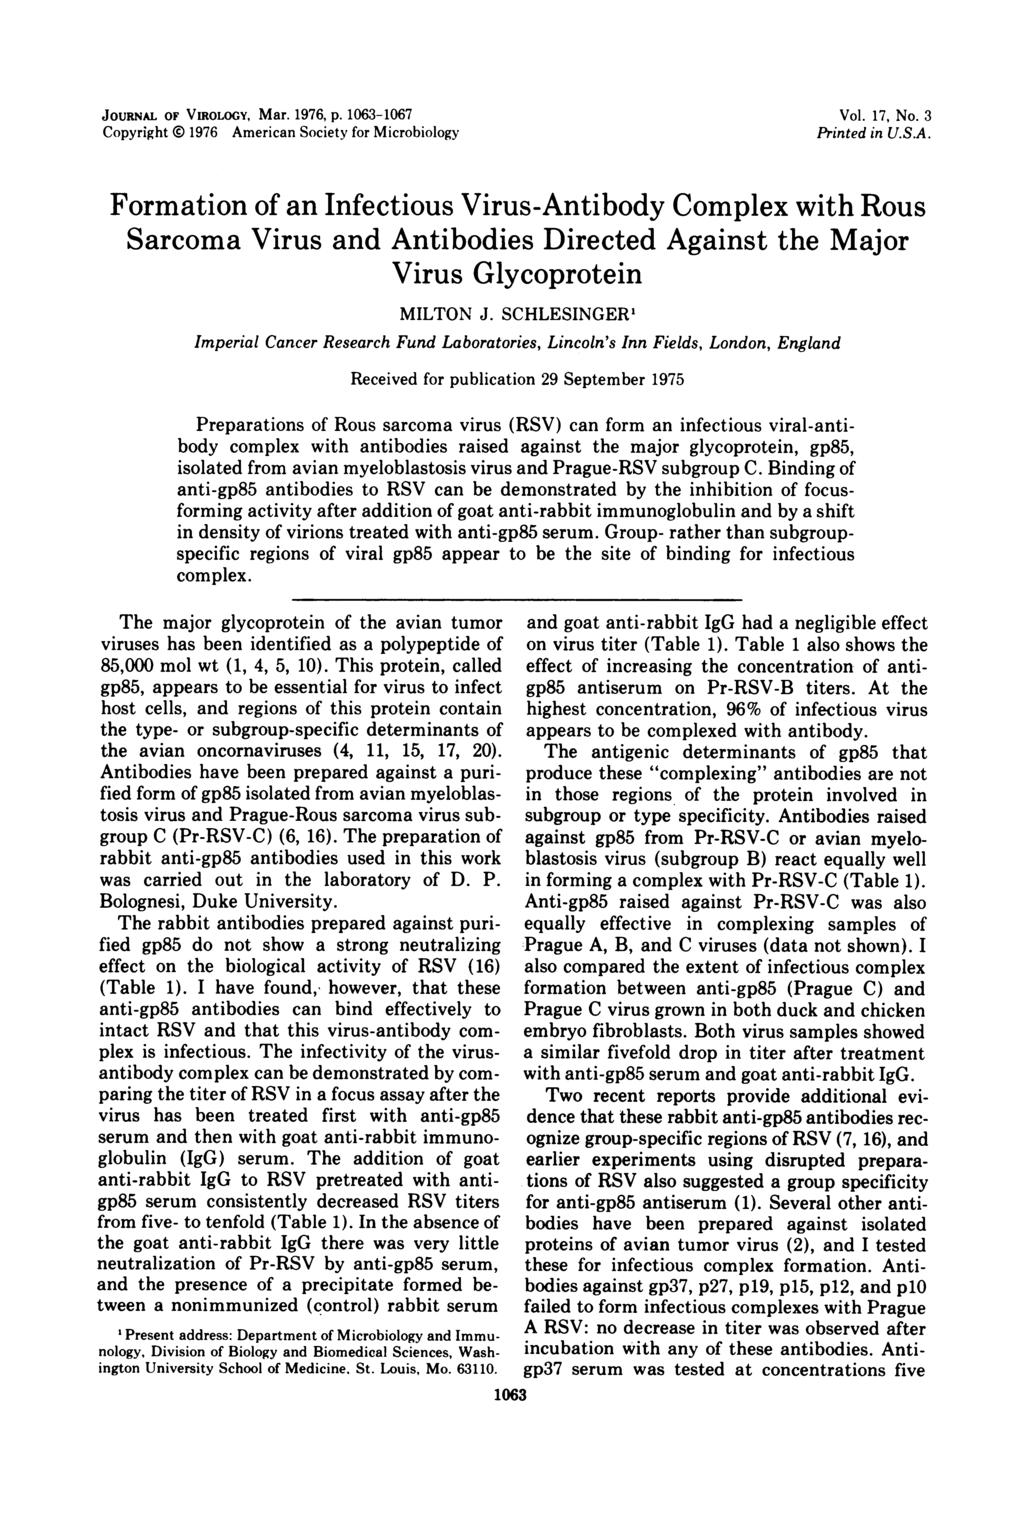 JOURNAL OF VIROLOGY, Mar. 1976, p. 163-167 Copyright 1976 American Society for Microbiology Vol. 17, No. 3 Printed in U.S.A. Formation of an Infectious Virus-Antibody Complex with Rous Sarcoma Virus and Antibodies Directed Against the Major Virus Glycoprotein MILTON J.